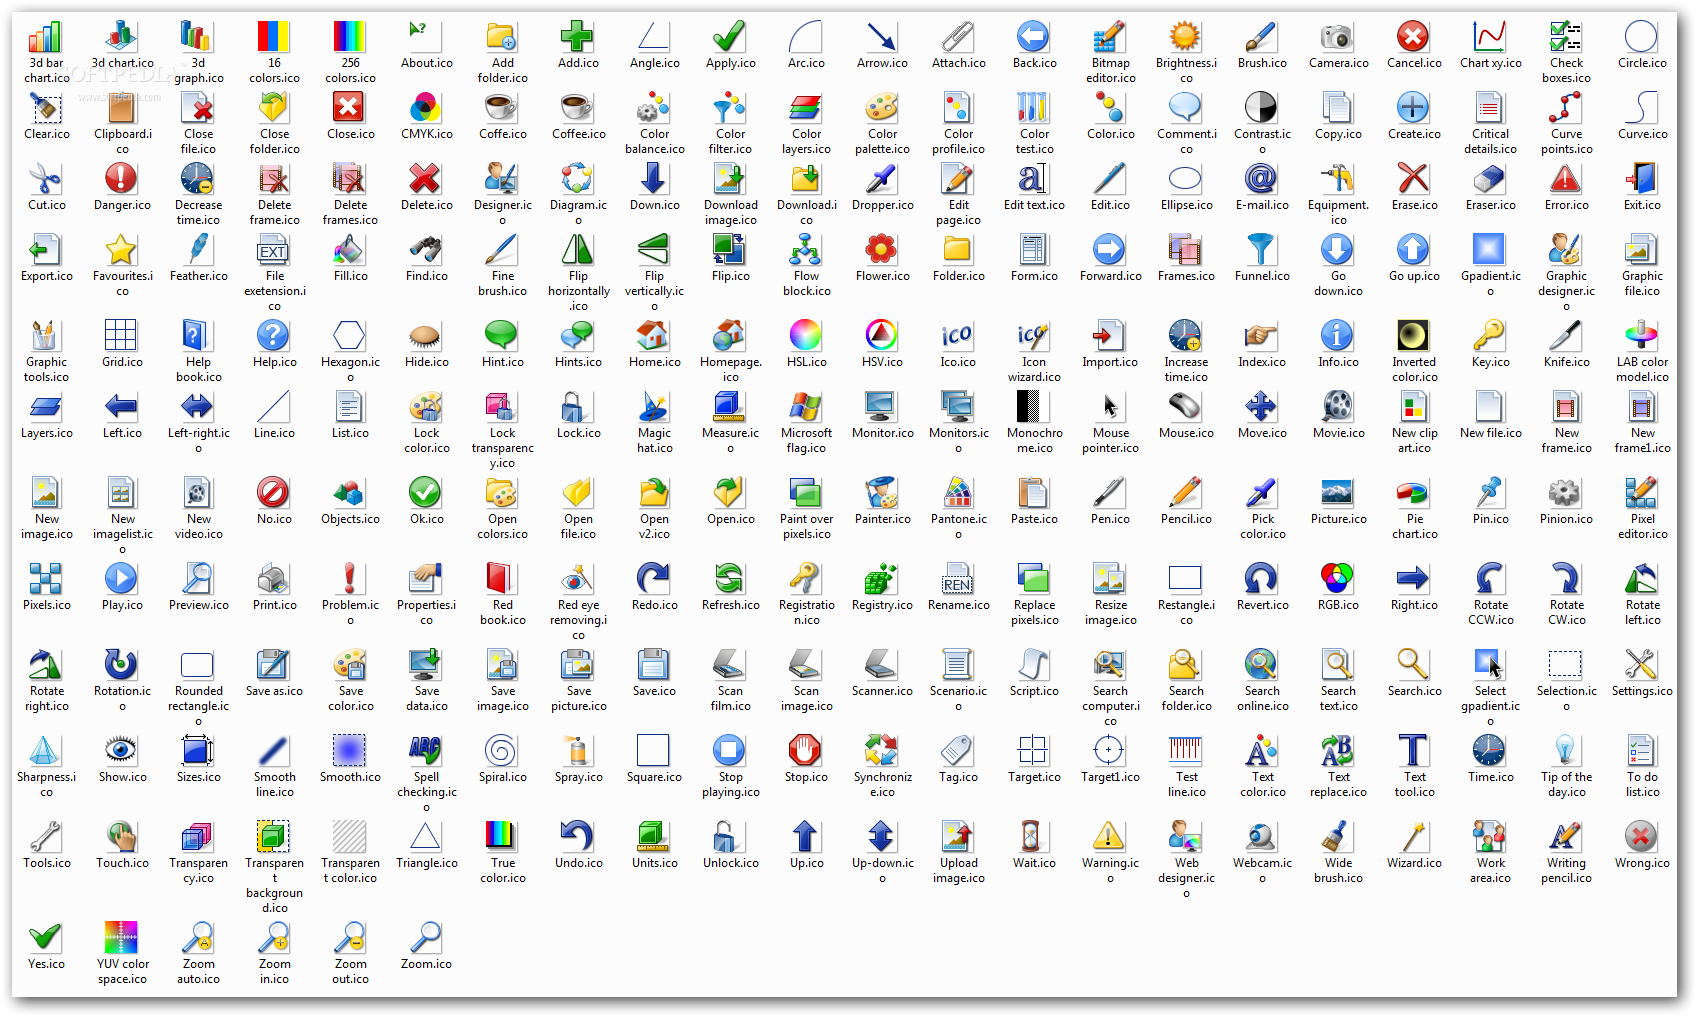 Download vector icon pack for windows 7 32 bit free